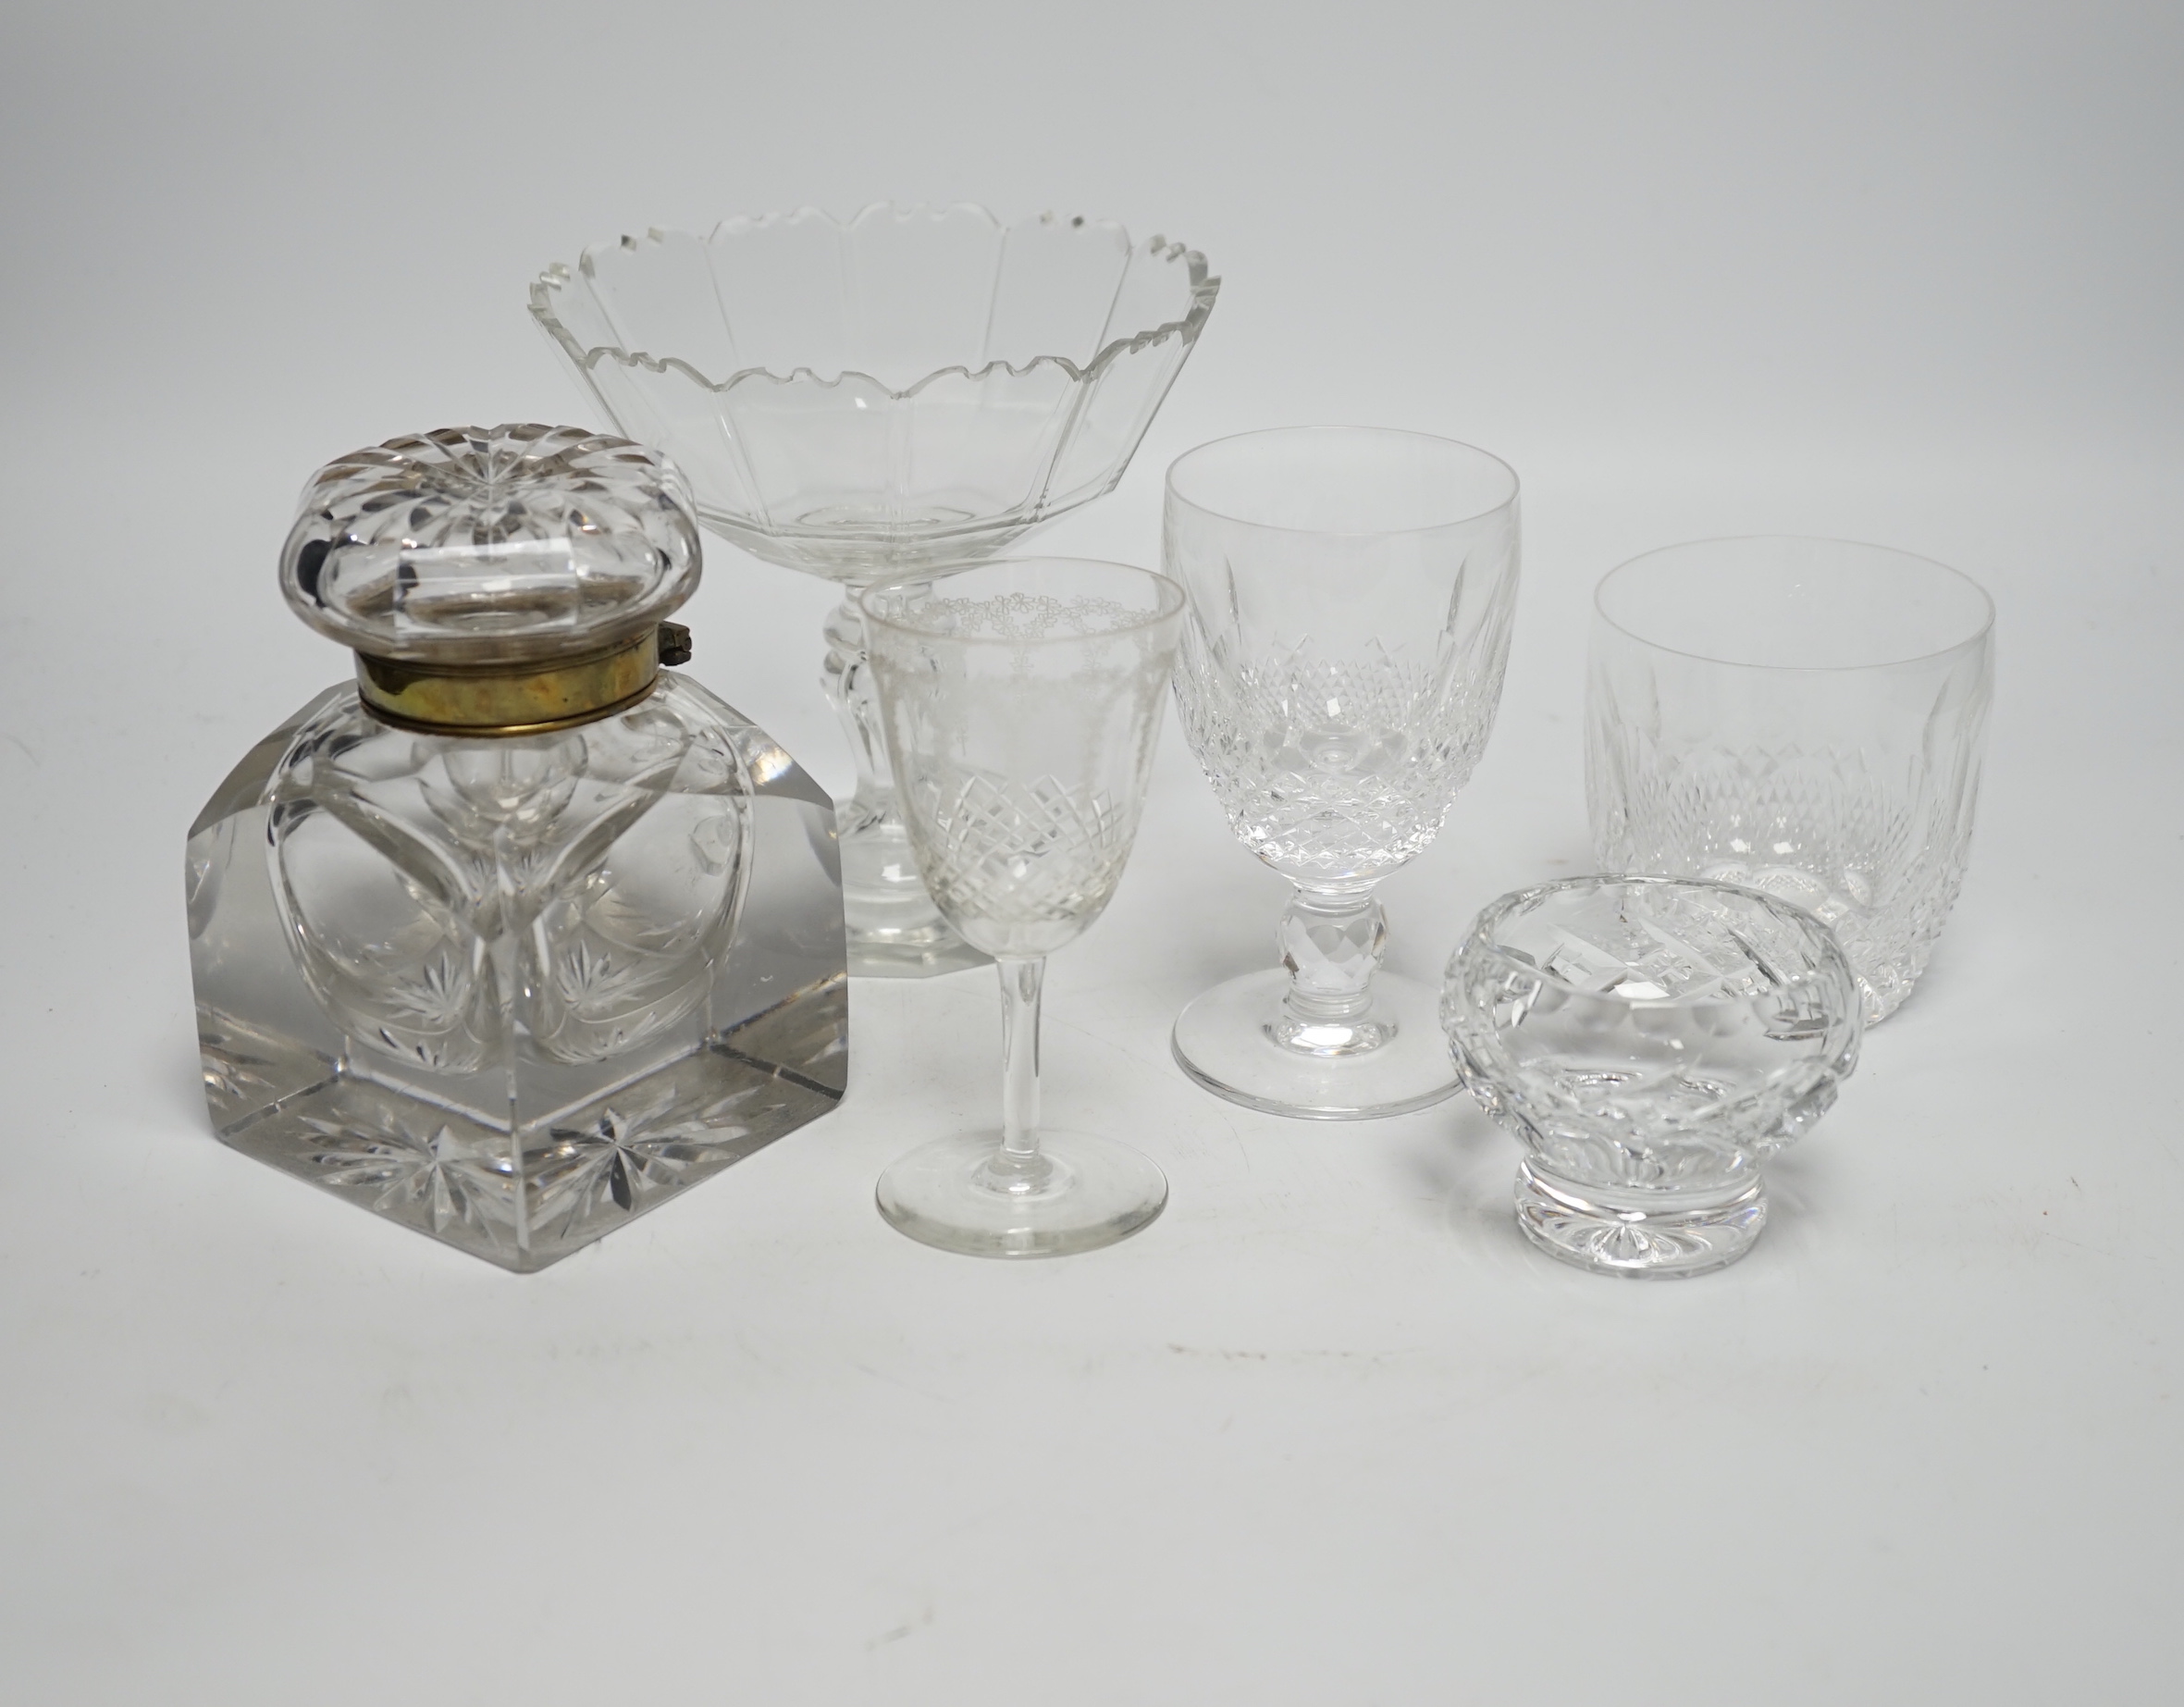 A Waterford cut crystal ‘’Colleen’’ pattern part suite of drinking glassware, together with a matching water jug and decanter and other glassware